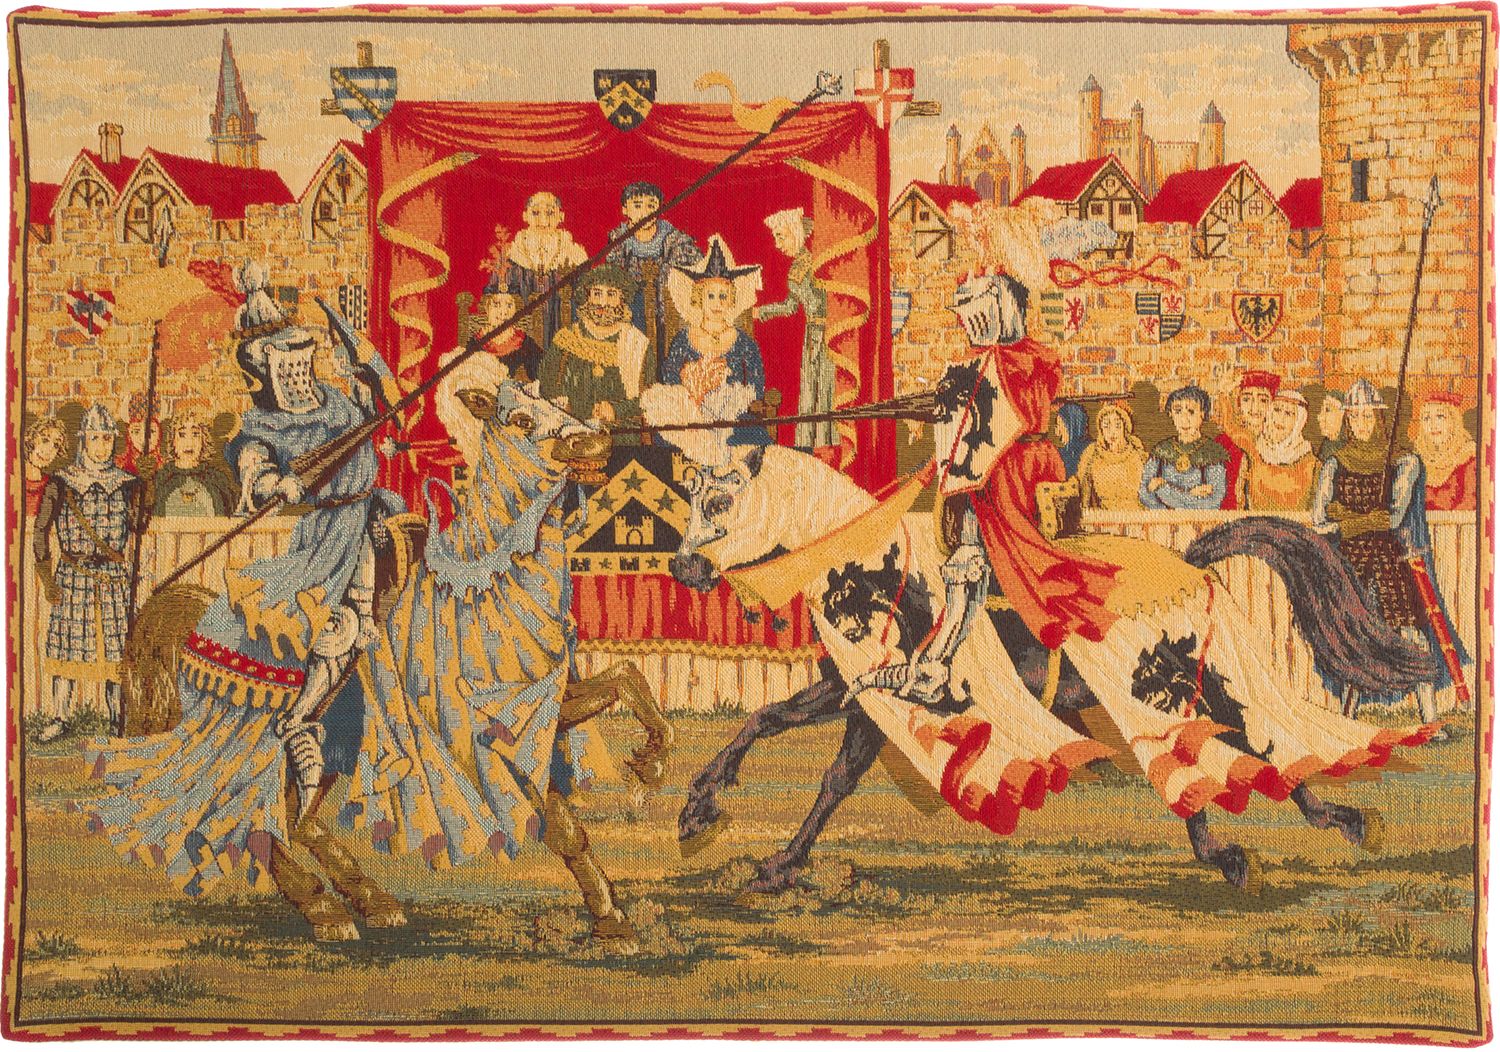 Medieval Jousting - Woven Wall Tapestry | The Tapestry Shop